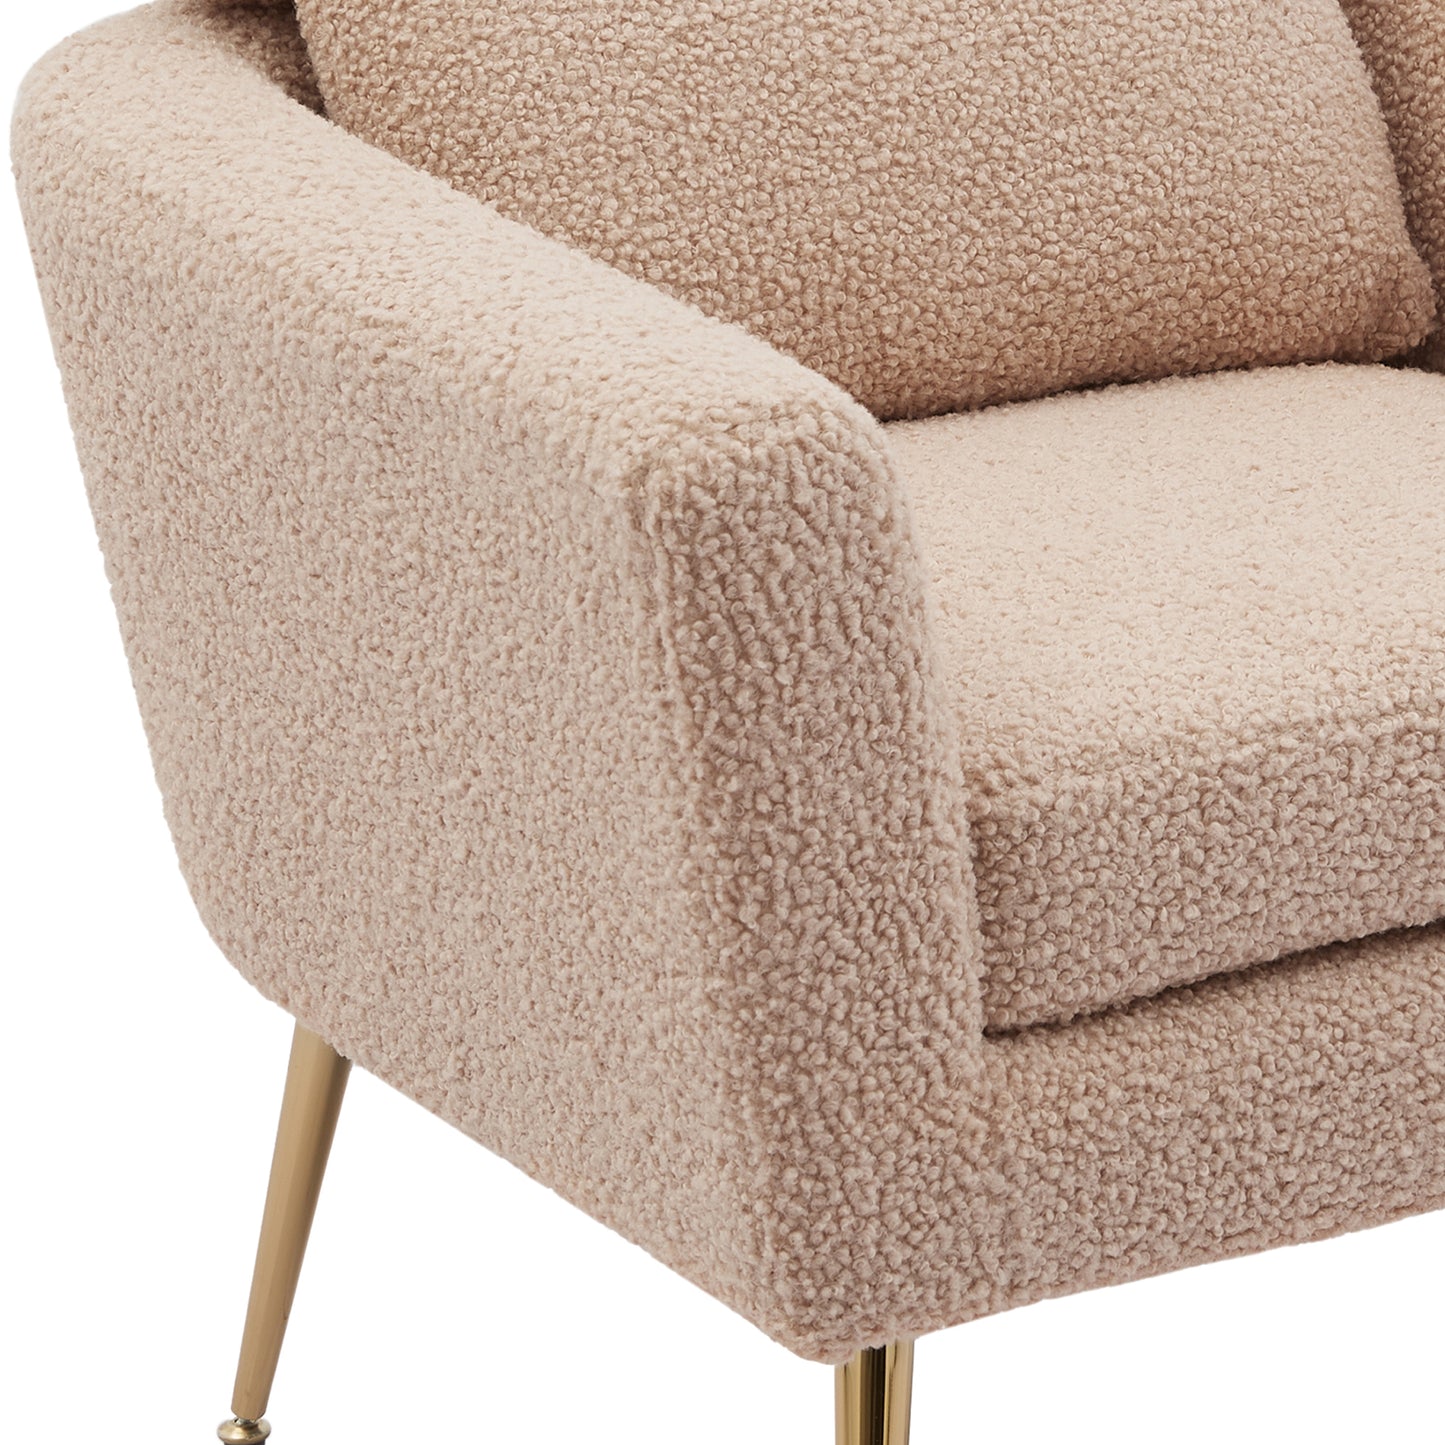 29.5"W Modern Boucle Accent Chair Armchair Upholstered Reading Chair Single Sofa Leisure Club Chair with Gold Metal Leg and Throw Pillow for Living Room Bedroom Dorm Room Office, Light Camel Boucle